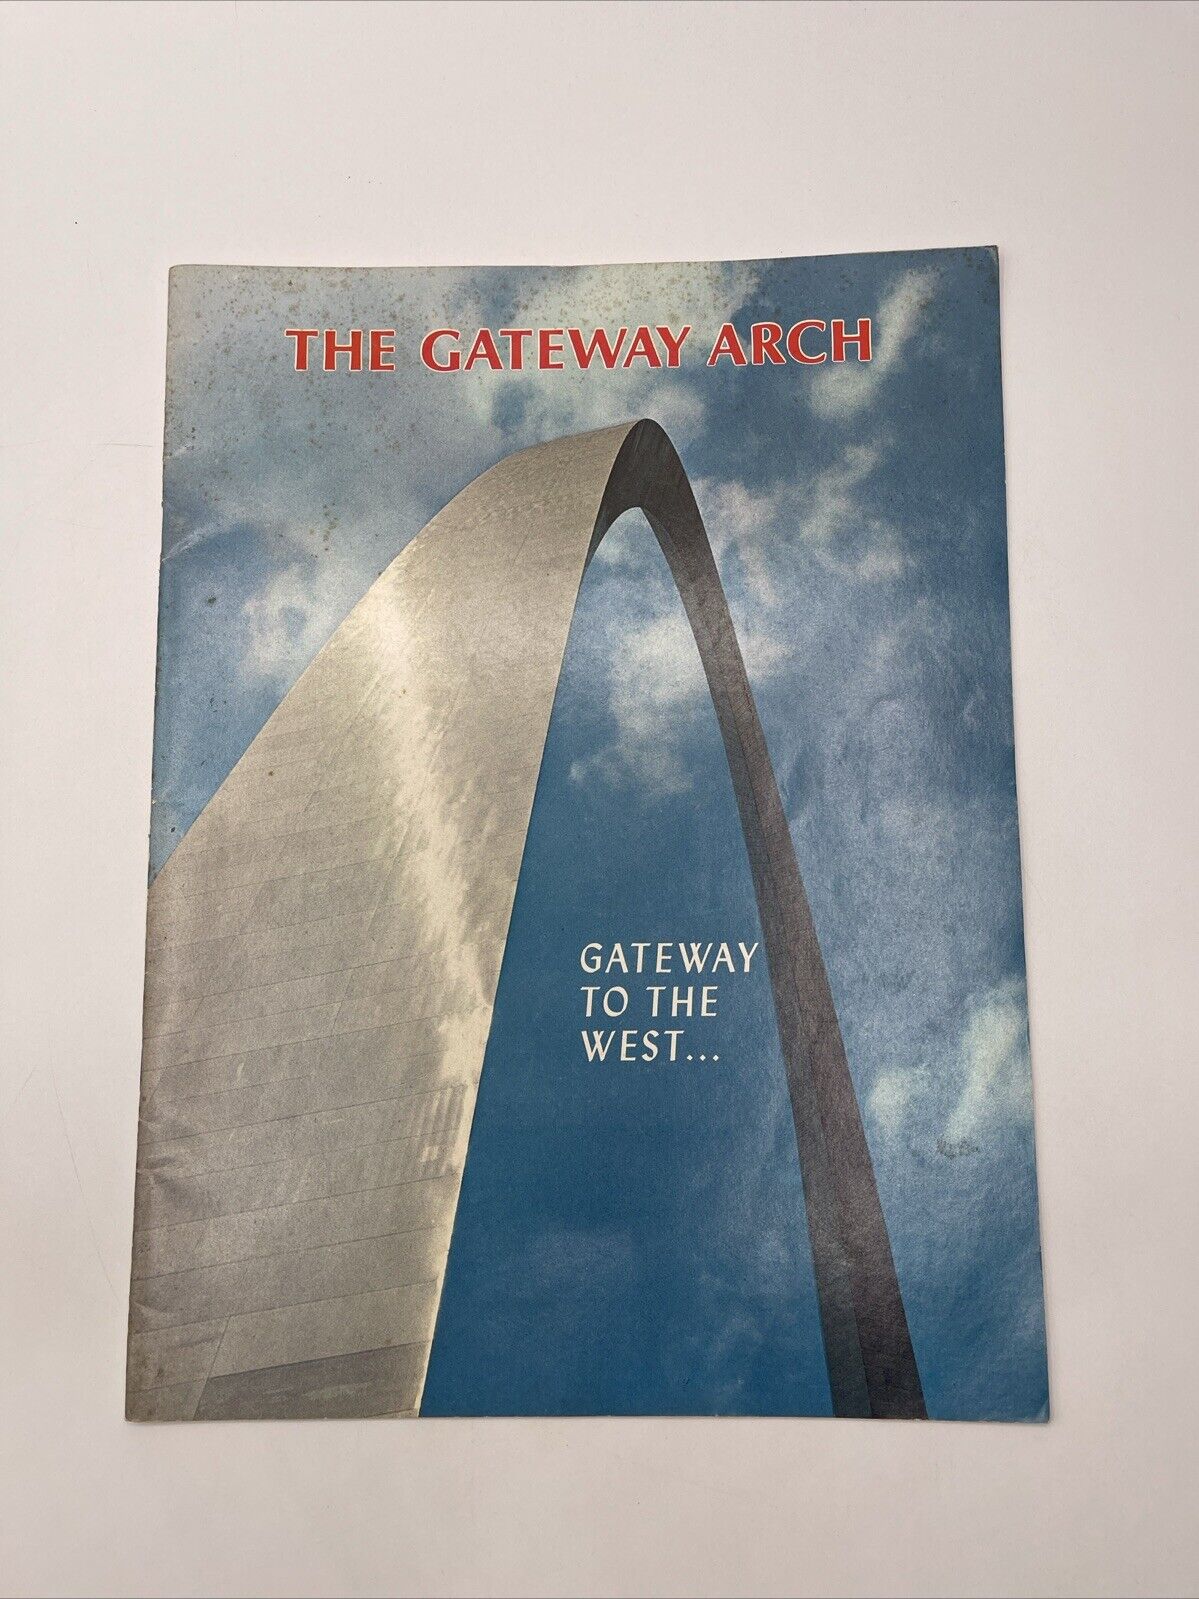 Dedication Of The Gateway Arch Jefferson National Expansion Memorial 1968